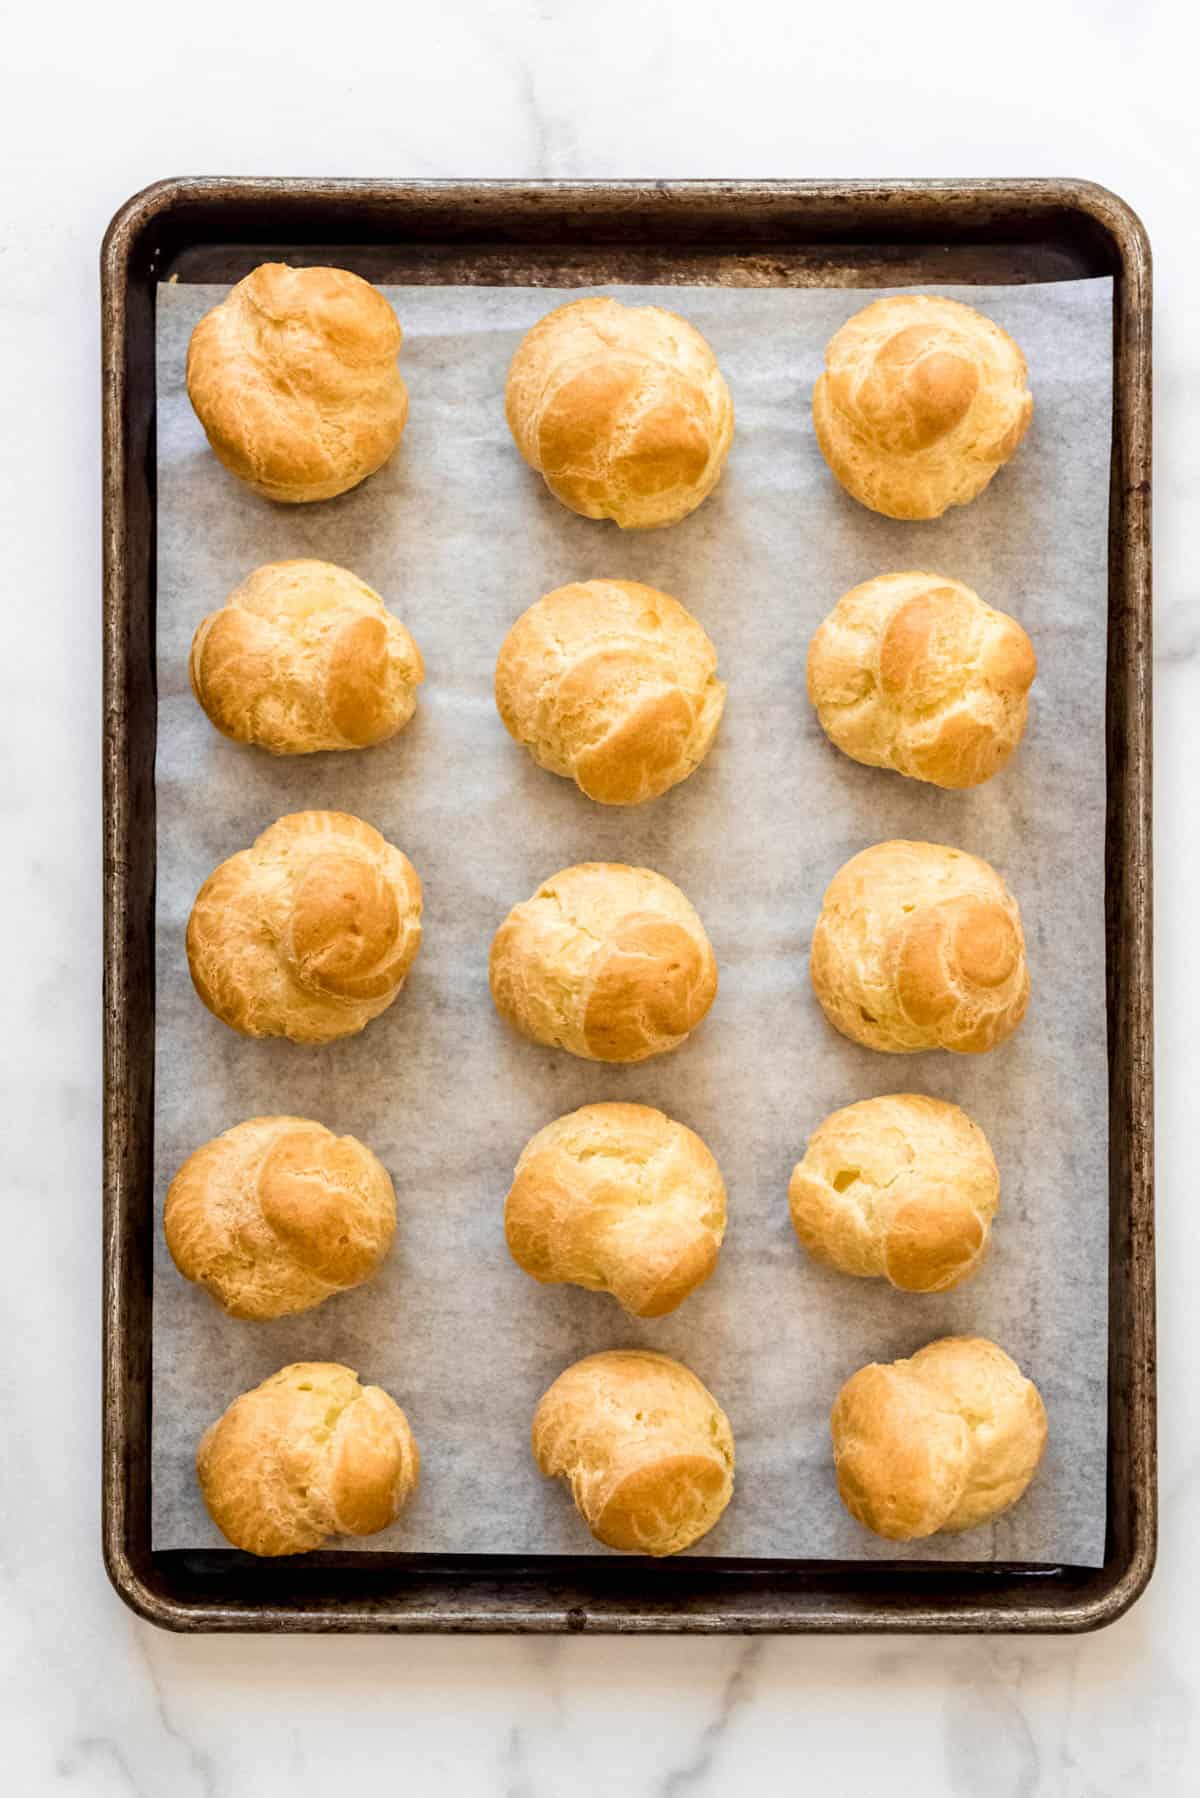 Baked cream puffs on a parchment lined baking sheet.